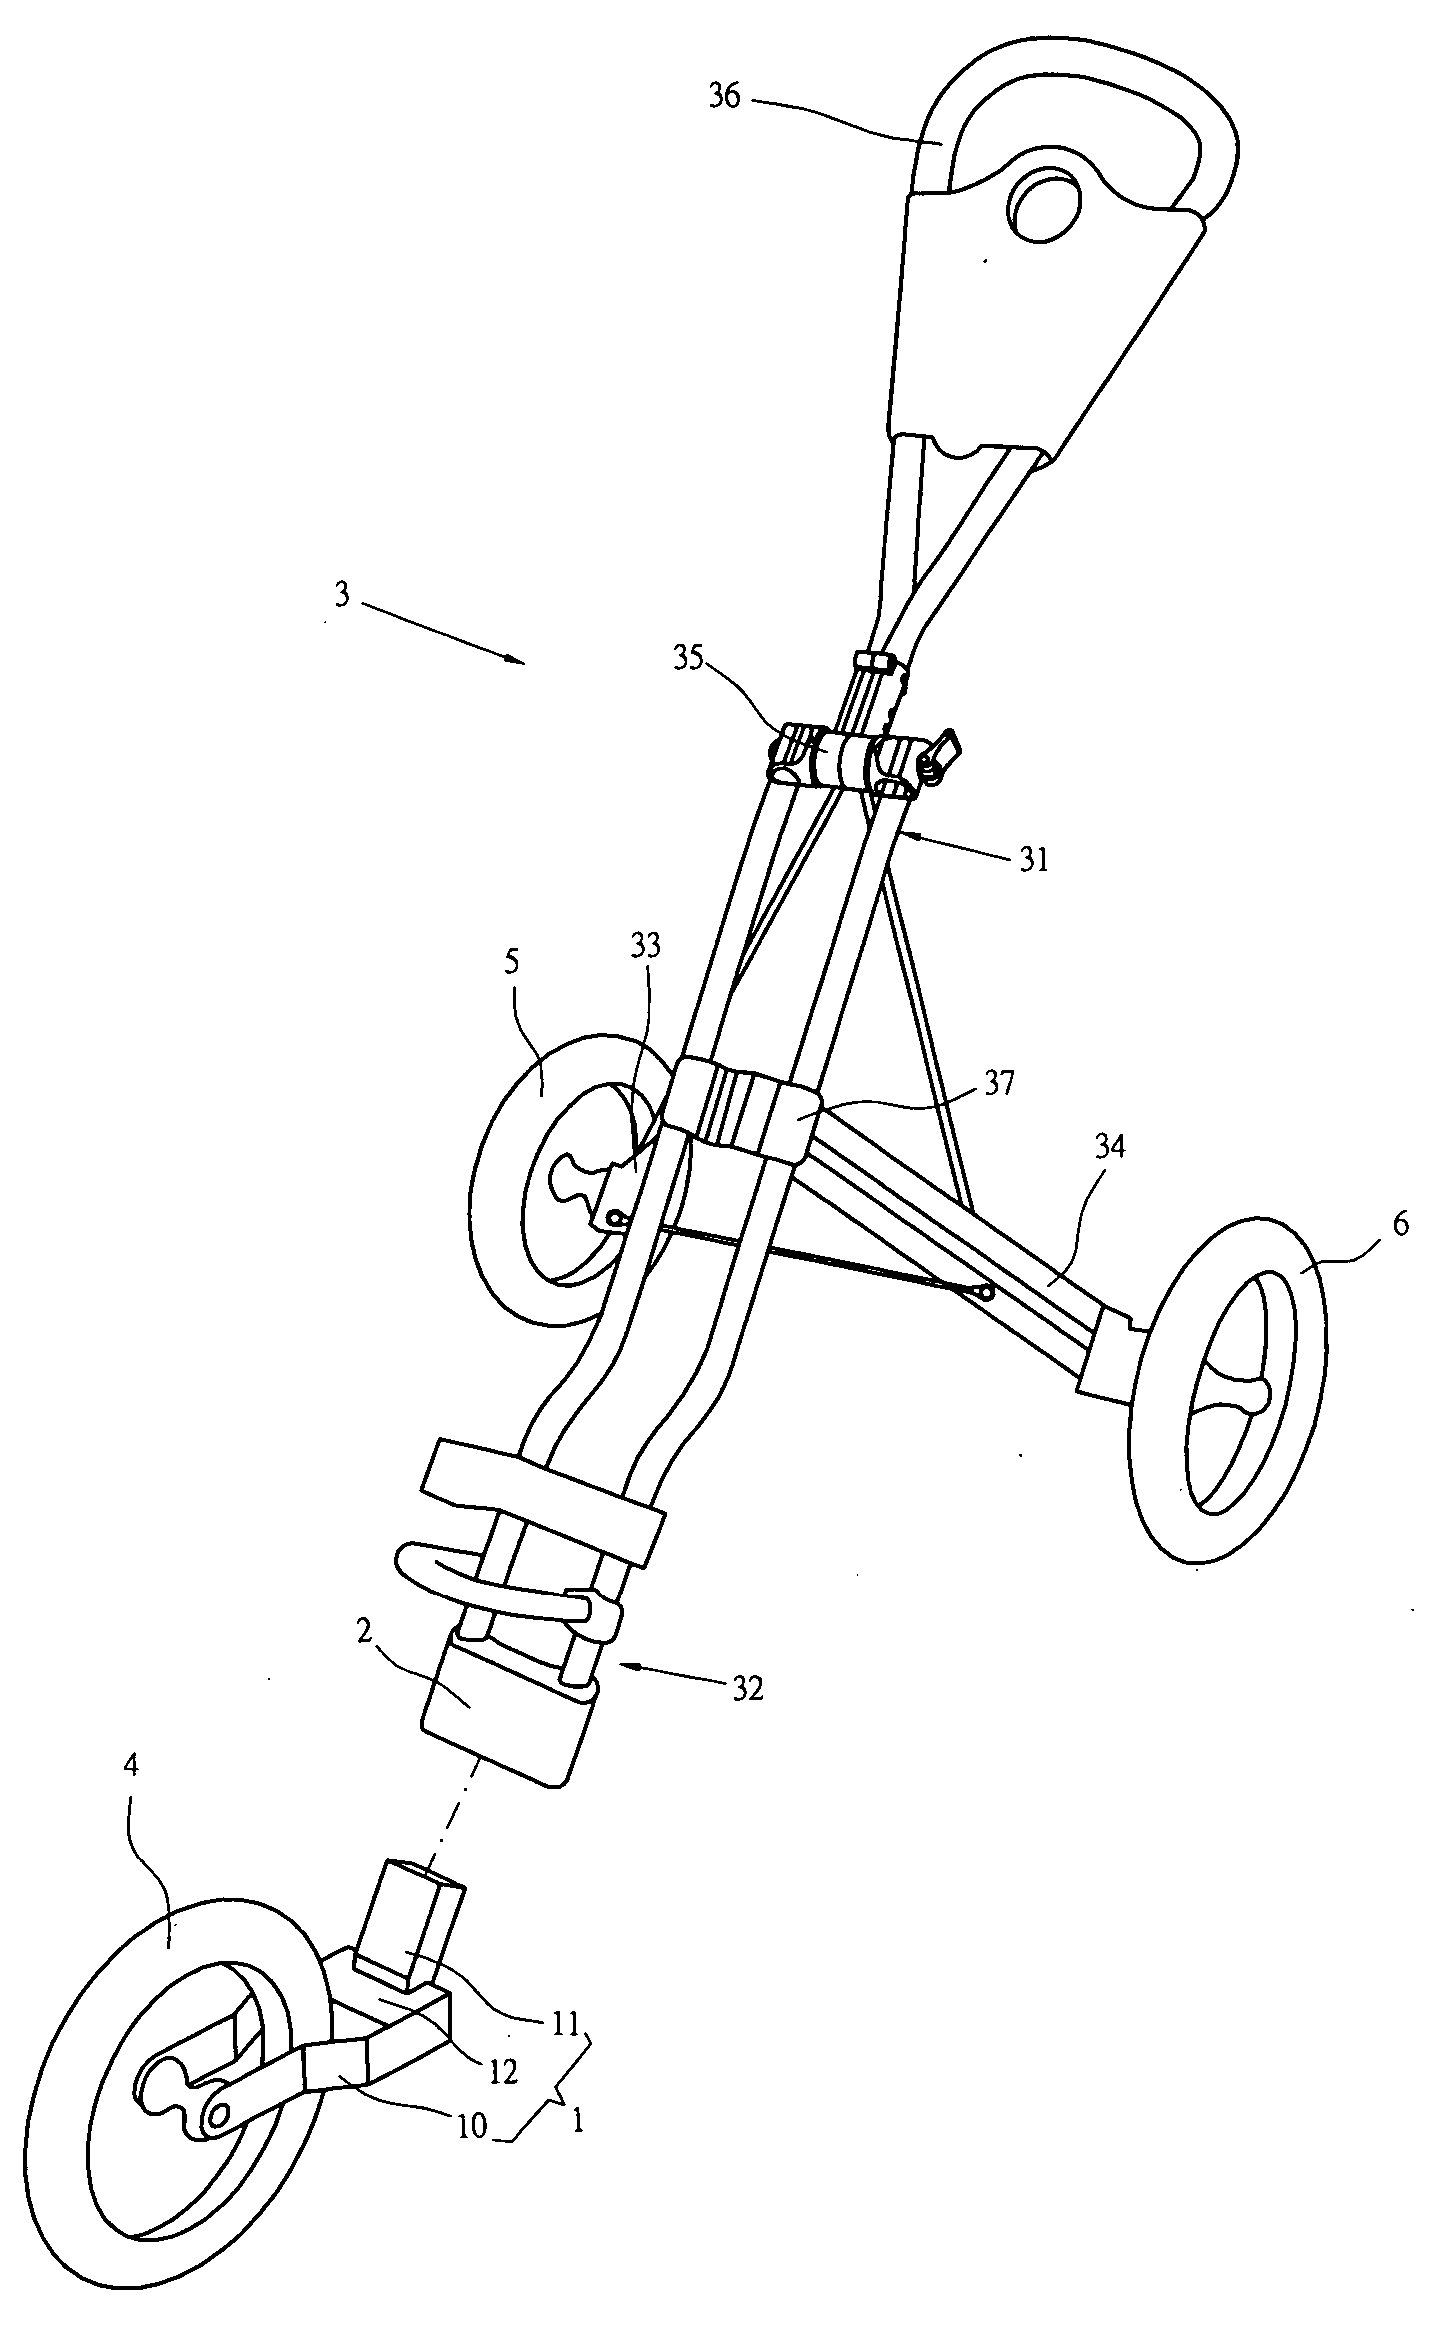 Easily detached and assembled golf cart with auxiliary wheel